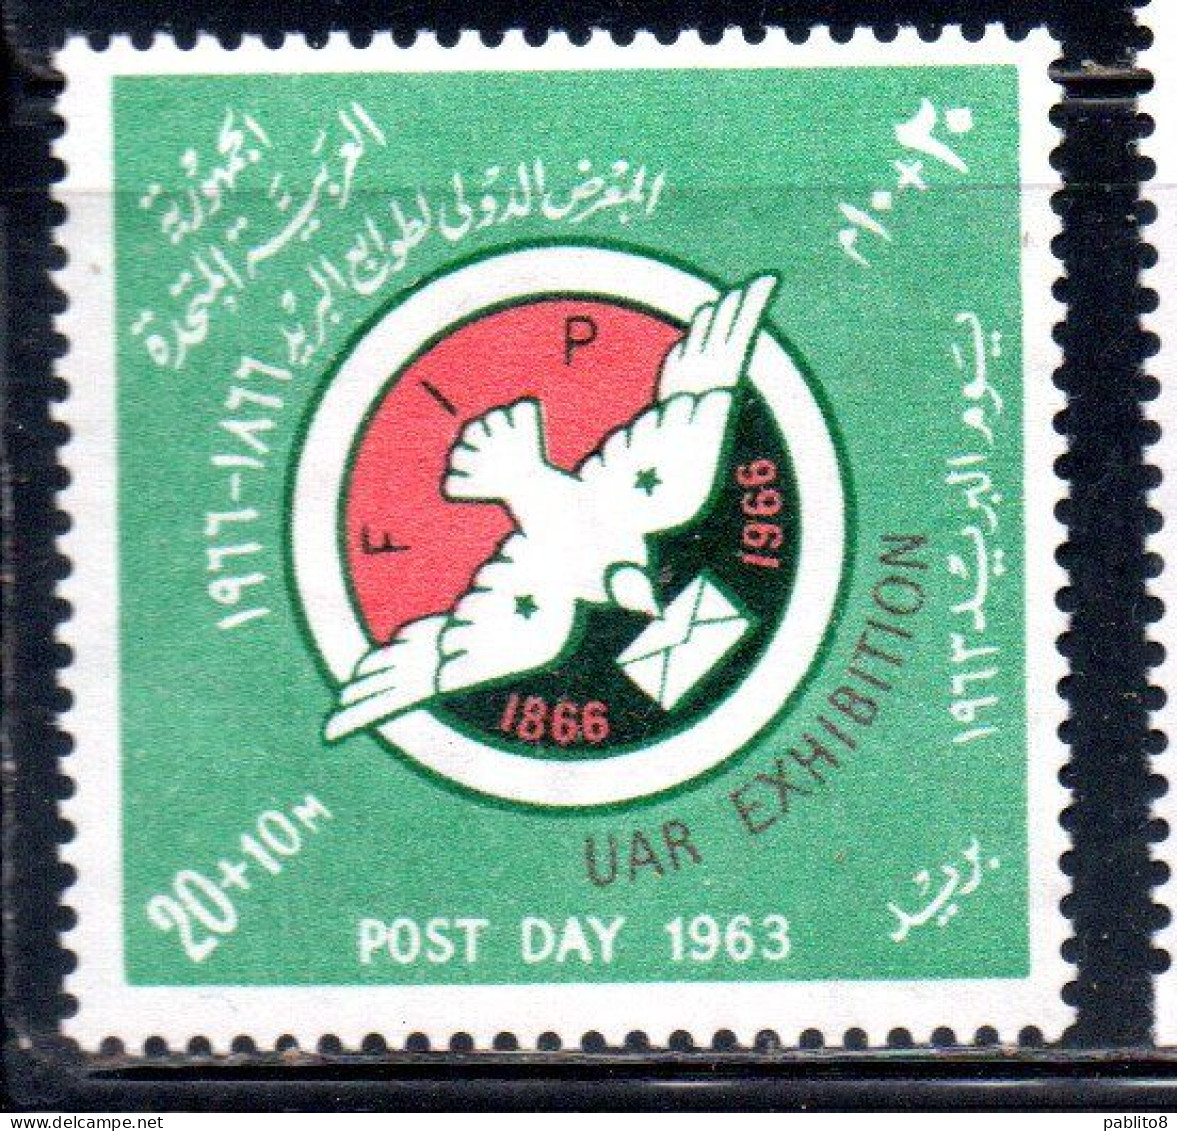 UAR EGYPT EGITTO 1963 POST DAY AND STAMP EXHIBITION 1966 OF THE FIP 20m + 10m MNH - Ungebraucht